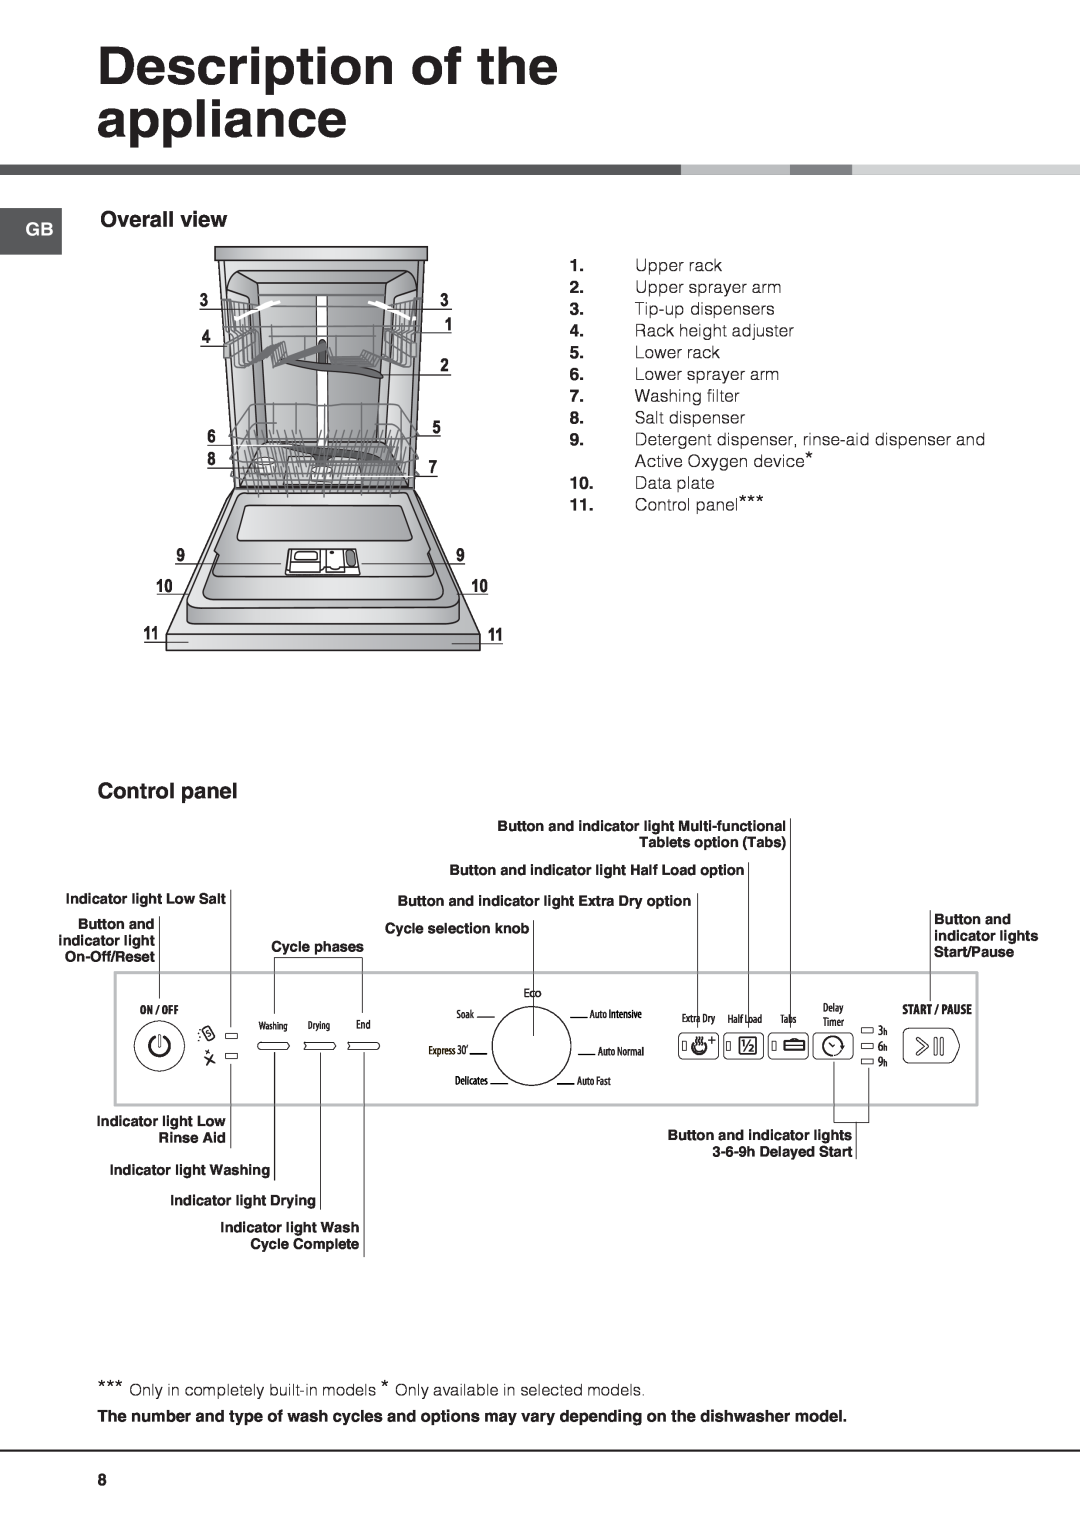 Hotpoint FDLET 31020 manual Description of the appliance, Overall view, Tablets option Tabs, Button and, Cycle phases 